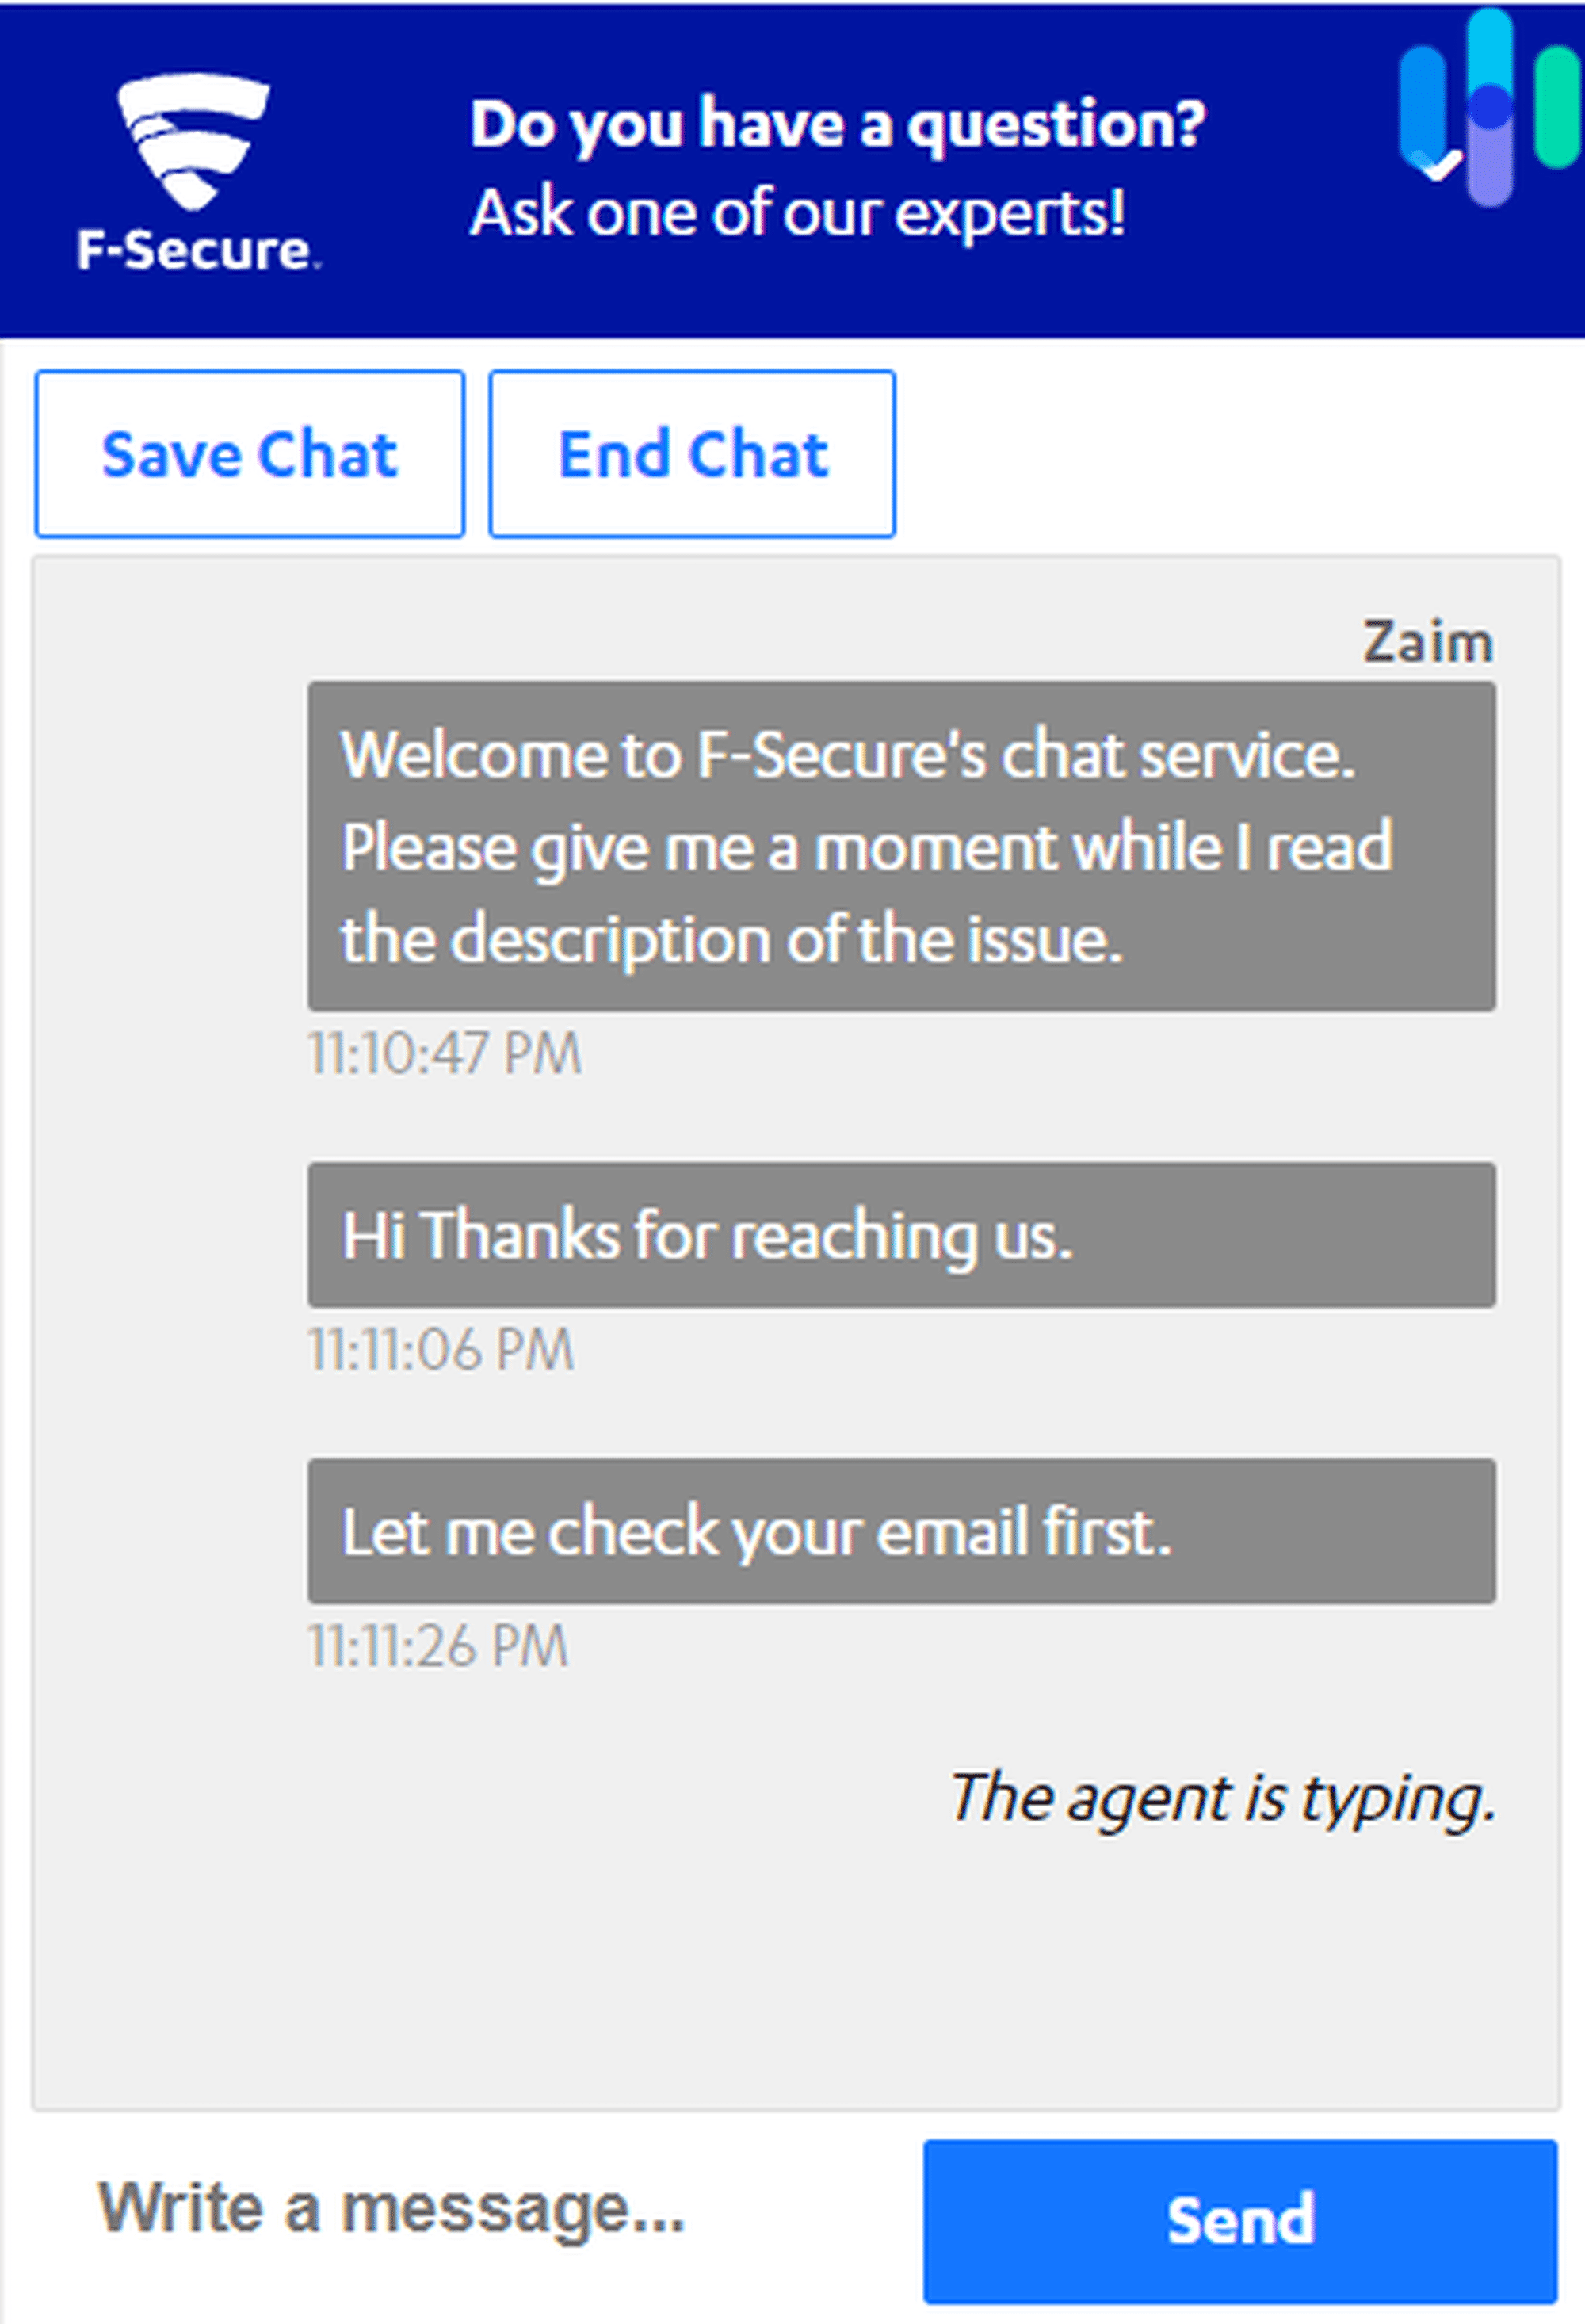 F-Secure Live Chat